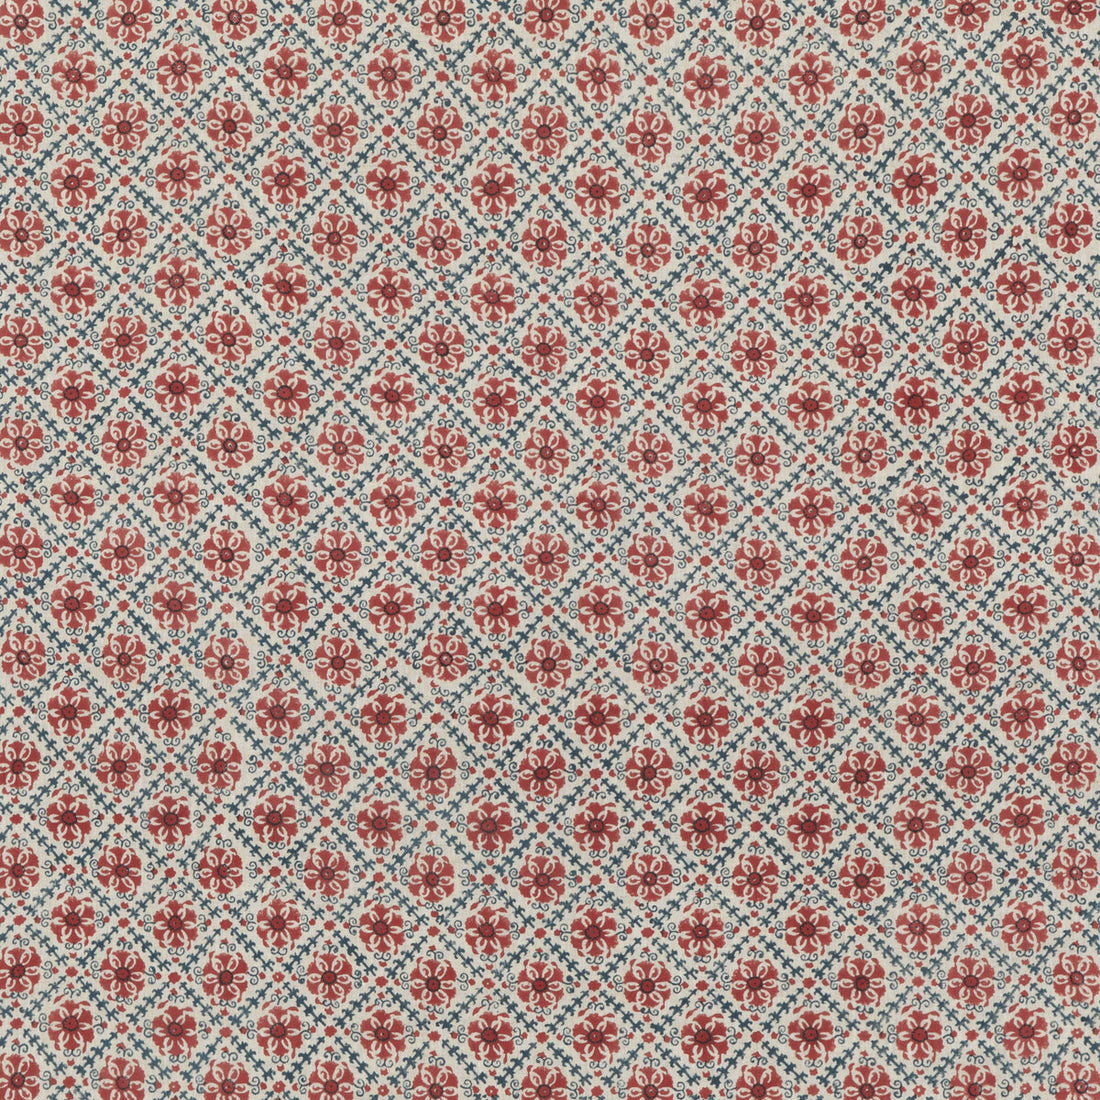 Camden Trellis fabric in red/ blue color - pattern BP10909.2.0 - by G P &amp; J Baker in the Portobello collection